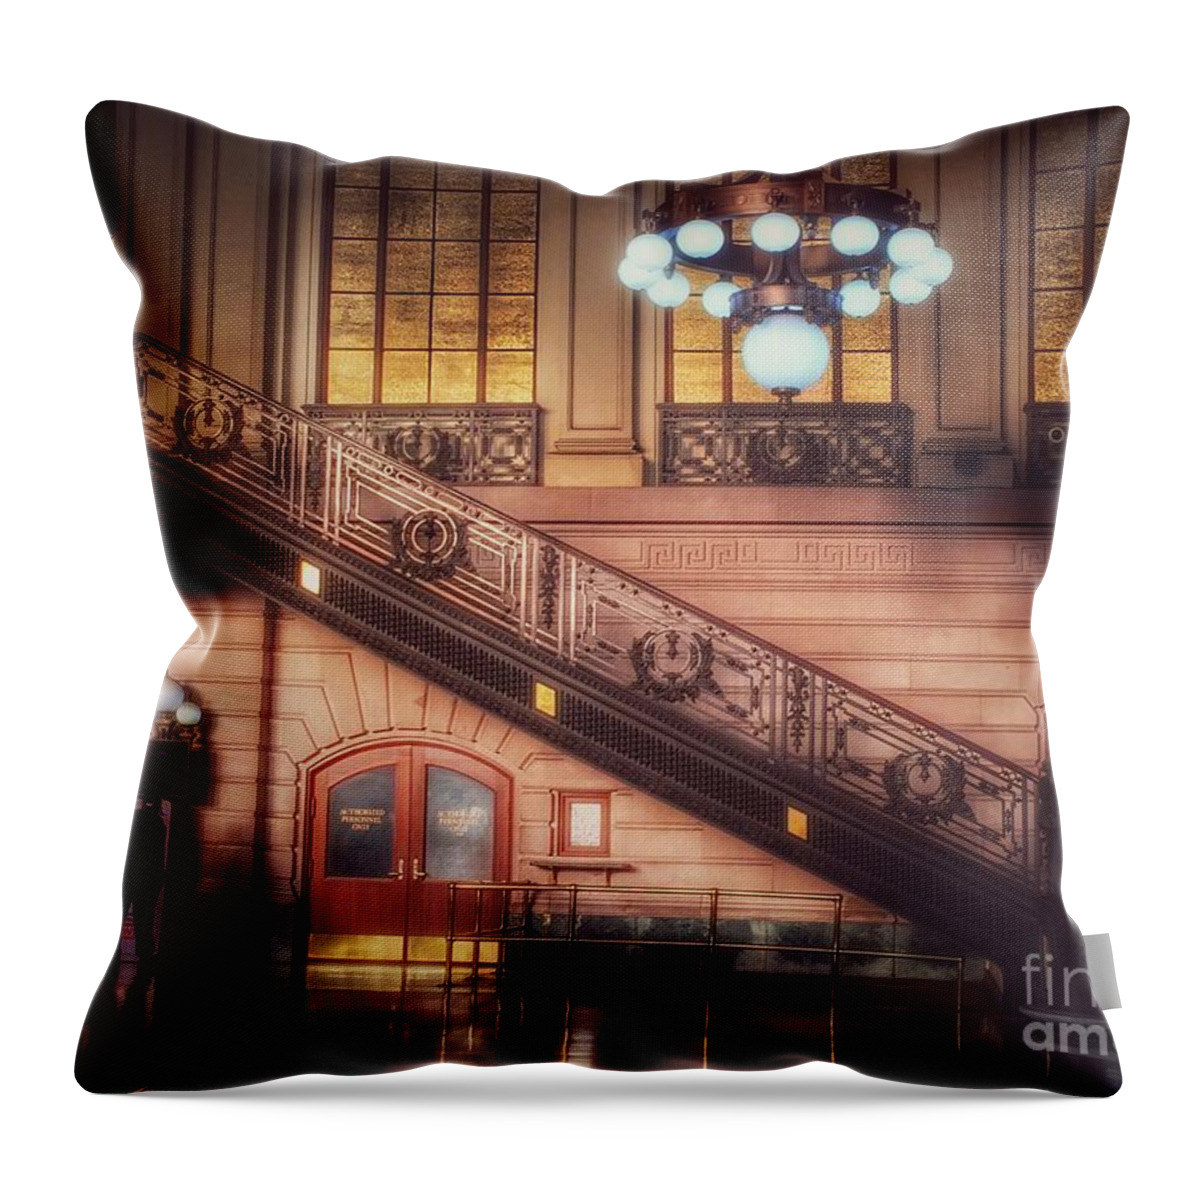 Hoboken Train Station Throw Pillow featuring the photograph Hoboken Train Station - Vintage Beauty of New Jersey by Miriam Danar